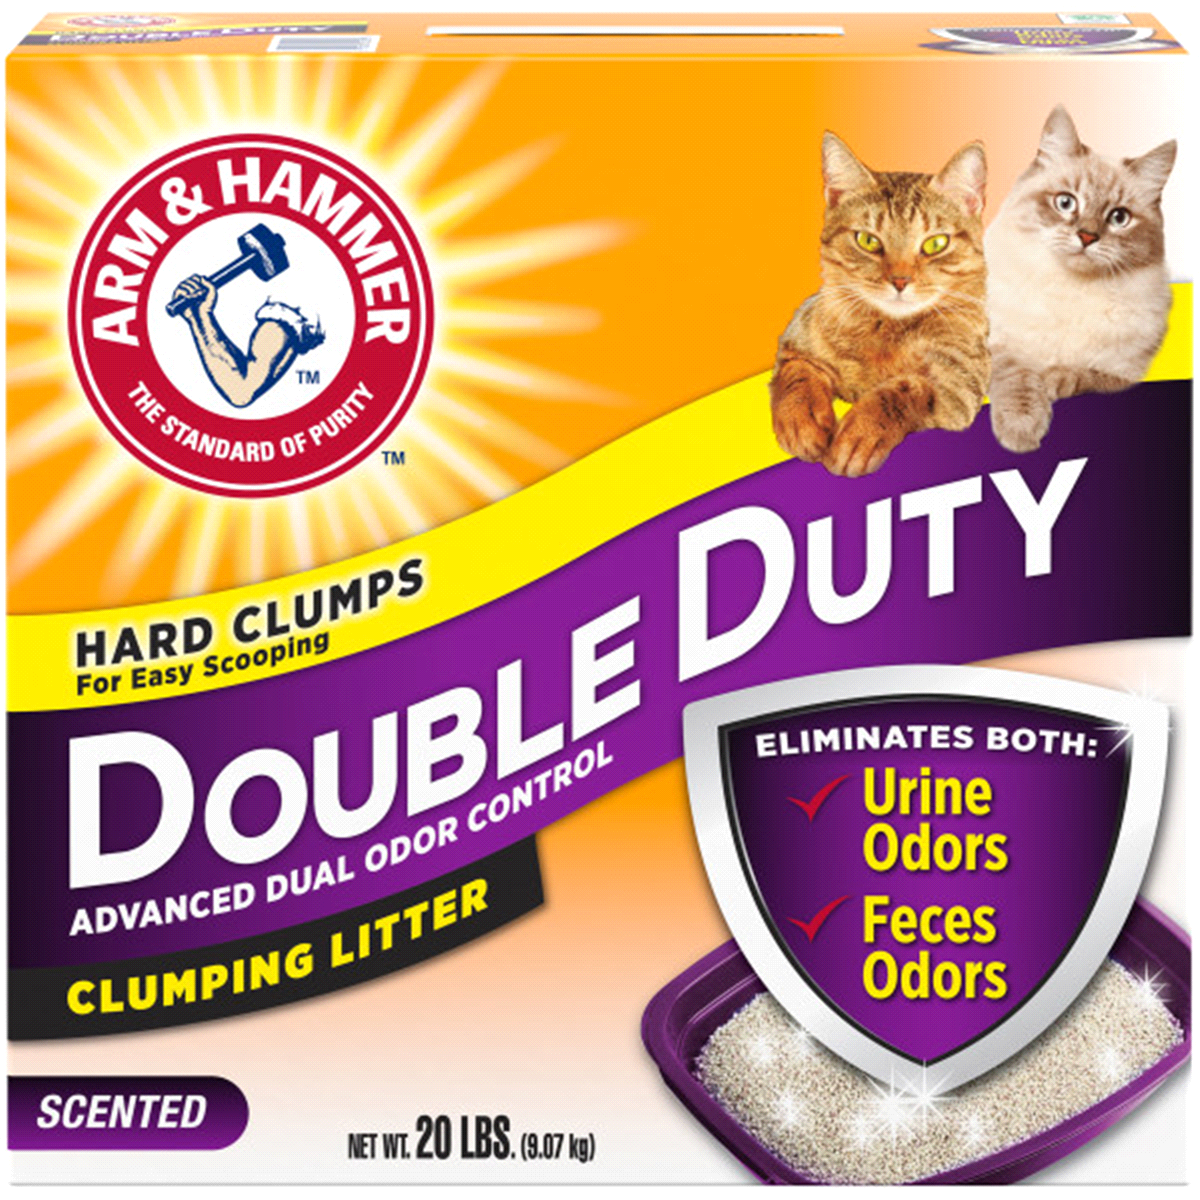 slide 1 of 3, ARM & HAMMER Double Duty Advanced Dual Odor Control Clumping Cat Litter, 20 lb